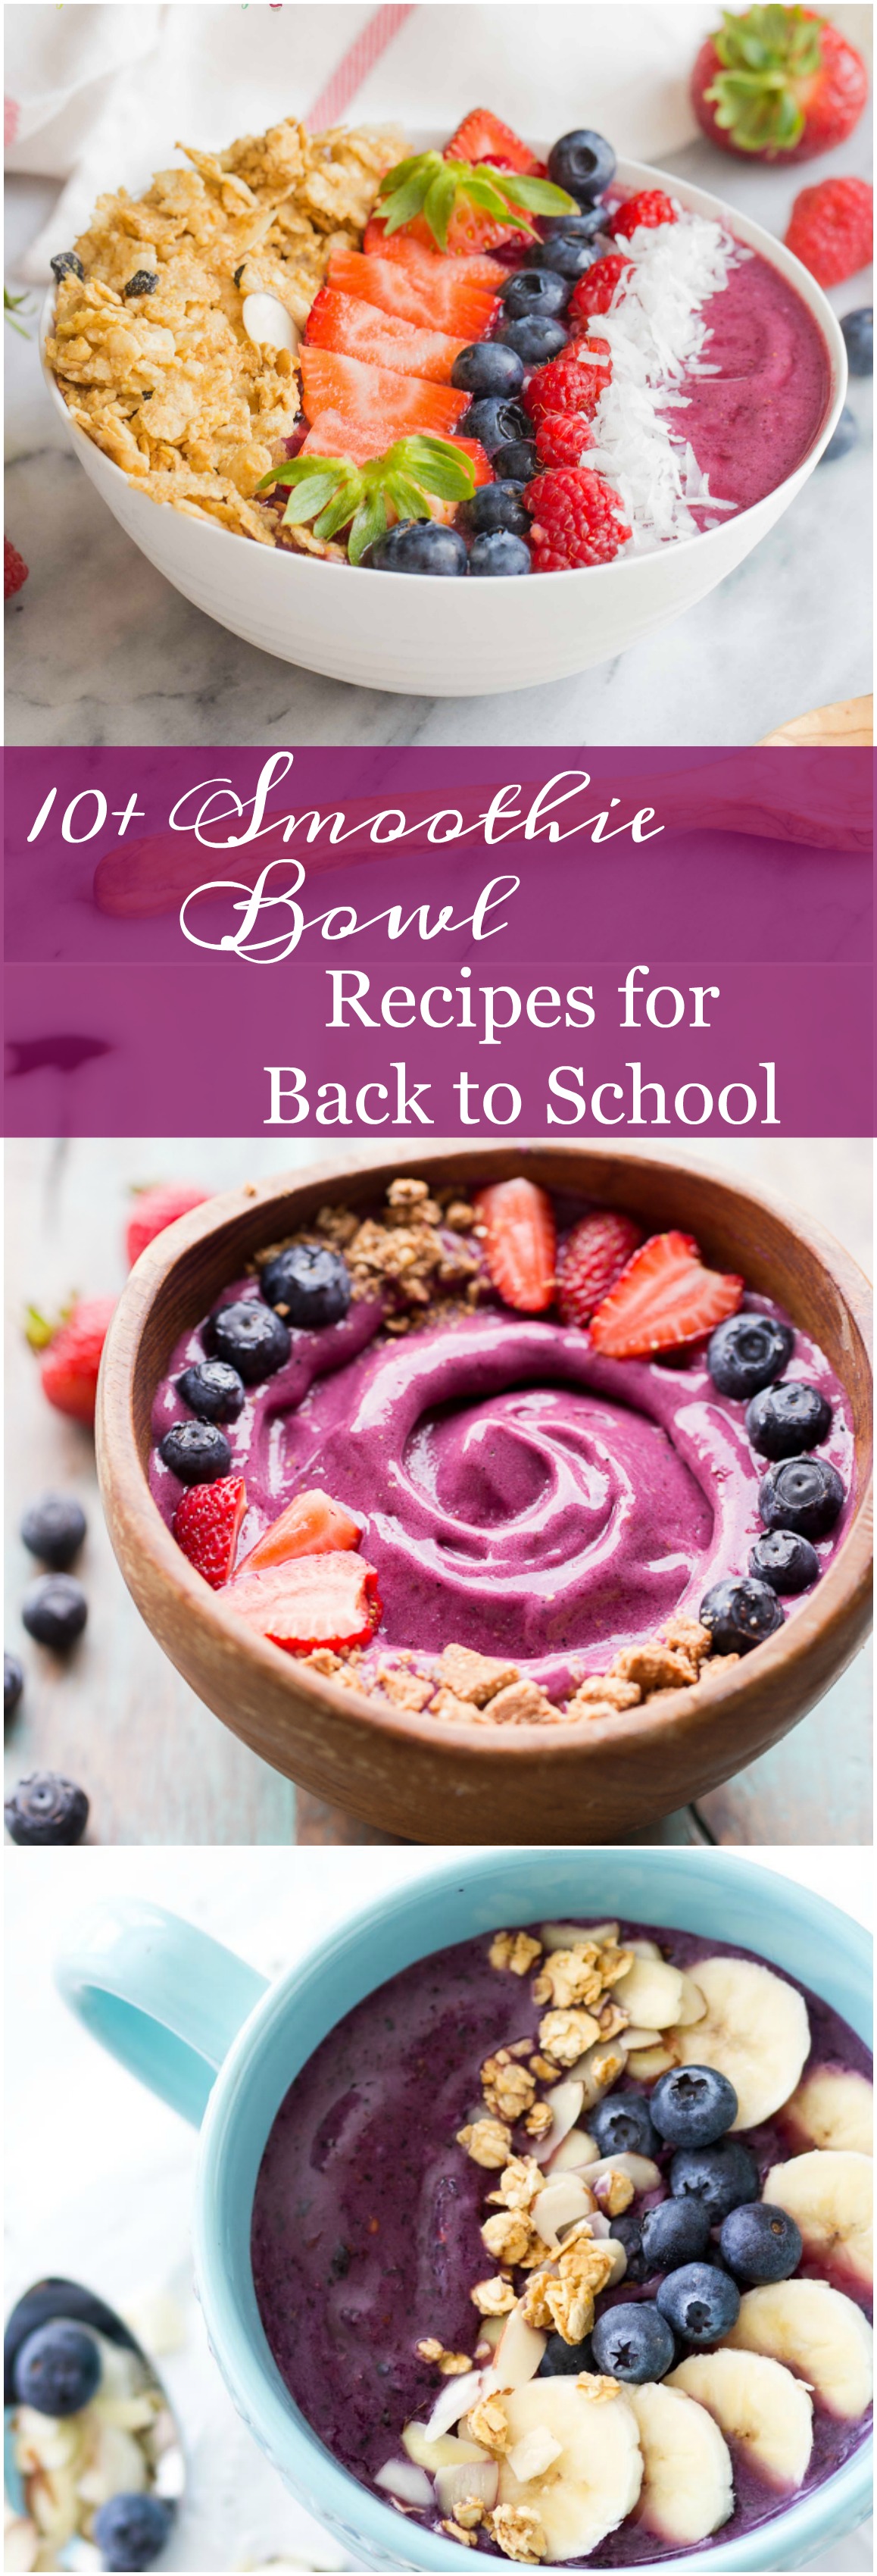 10+ Smoothie Bowl Recipes for Back to School 